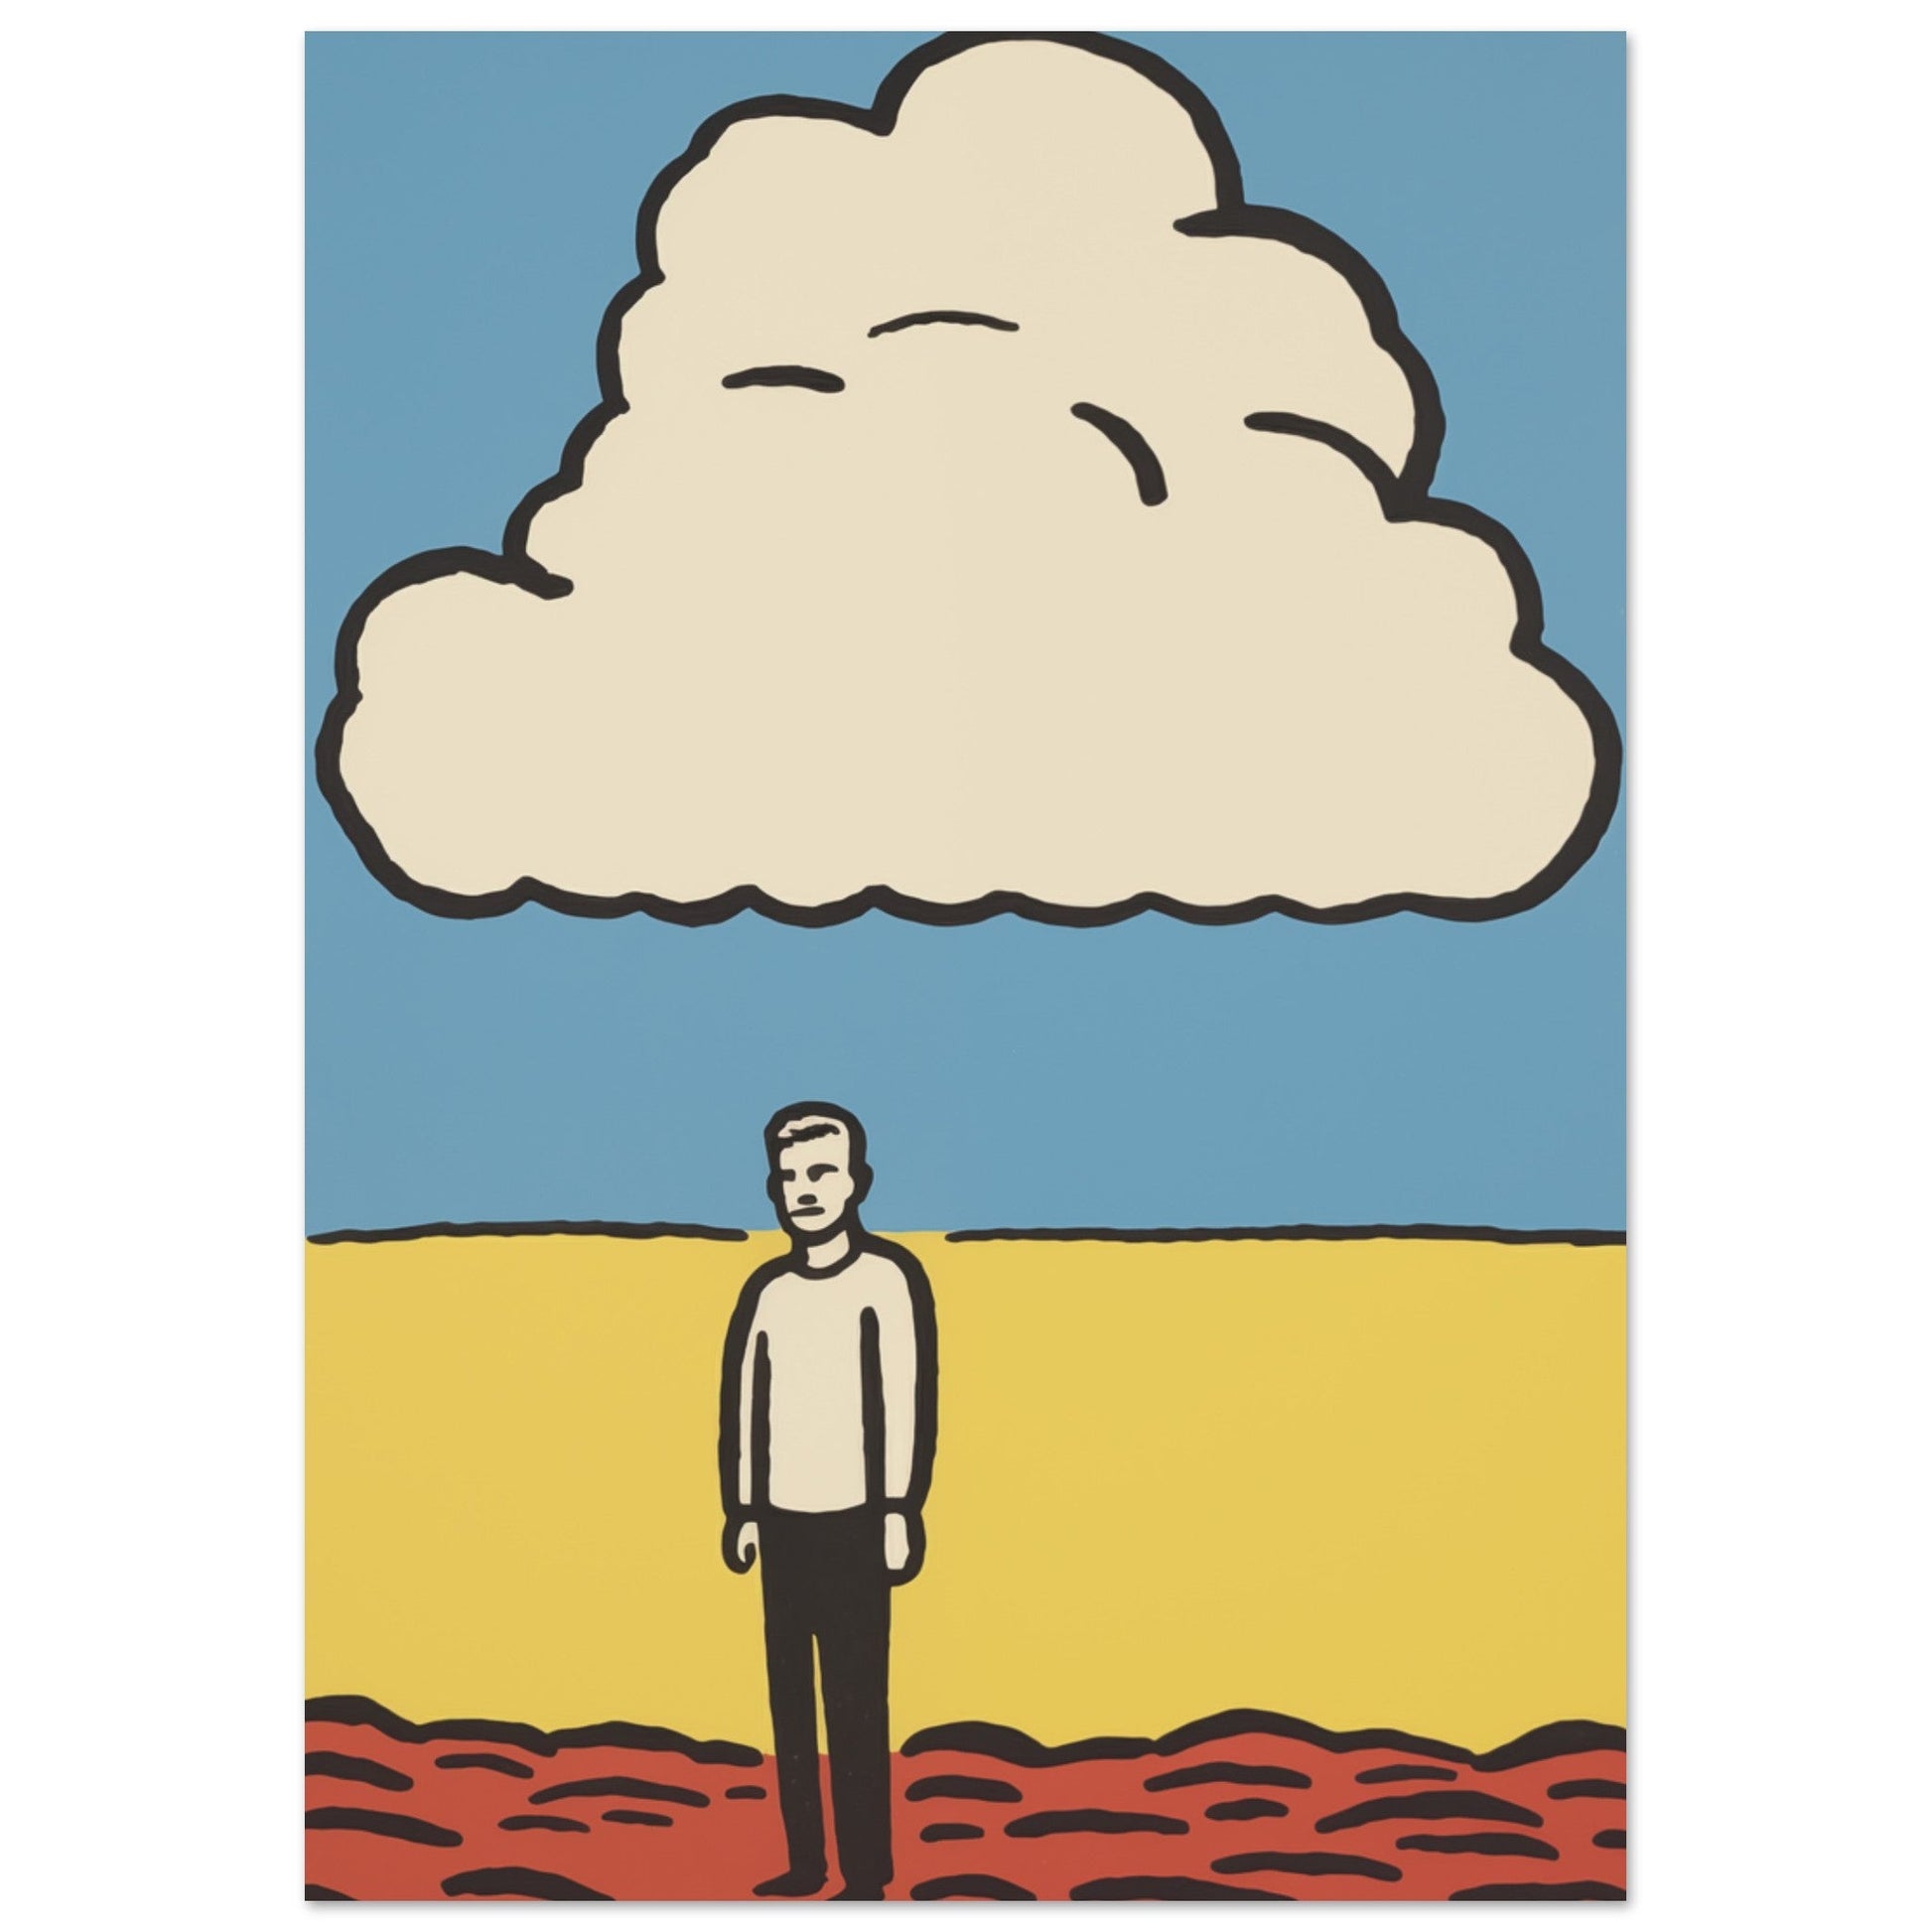 A man standing in the middle of a field with a cloud above him, showcased as an impactful colored In Reverie wall art.